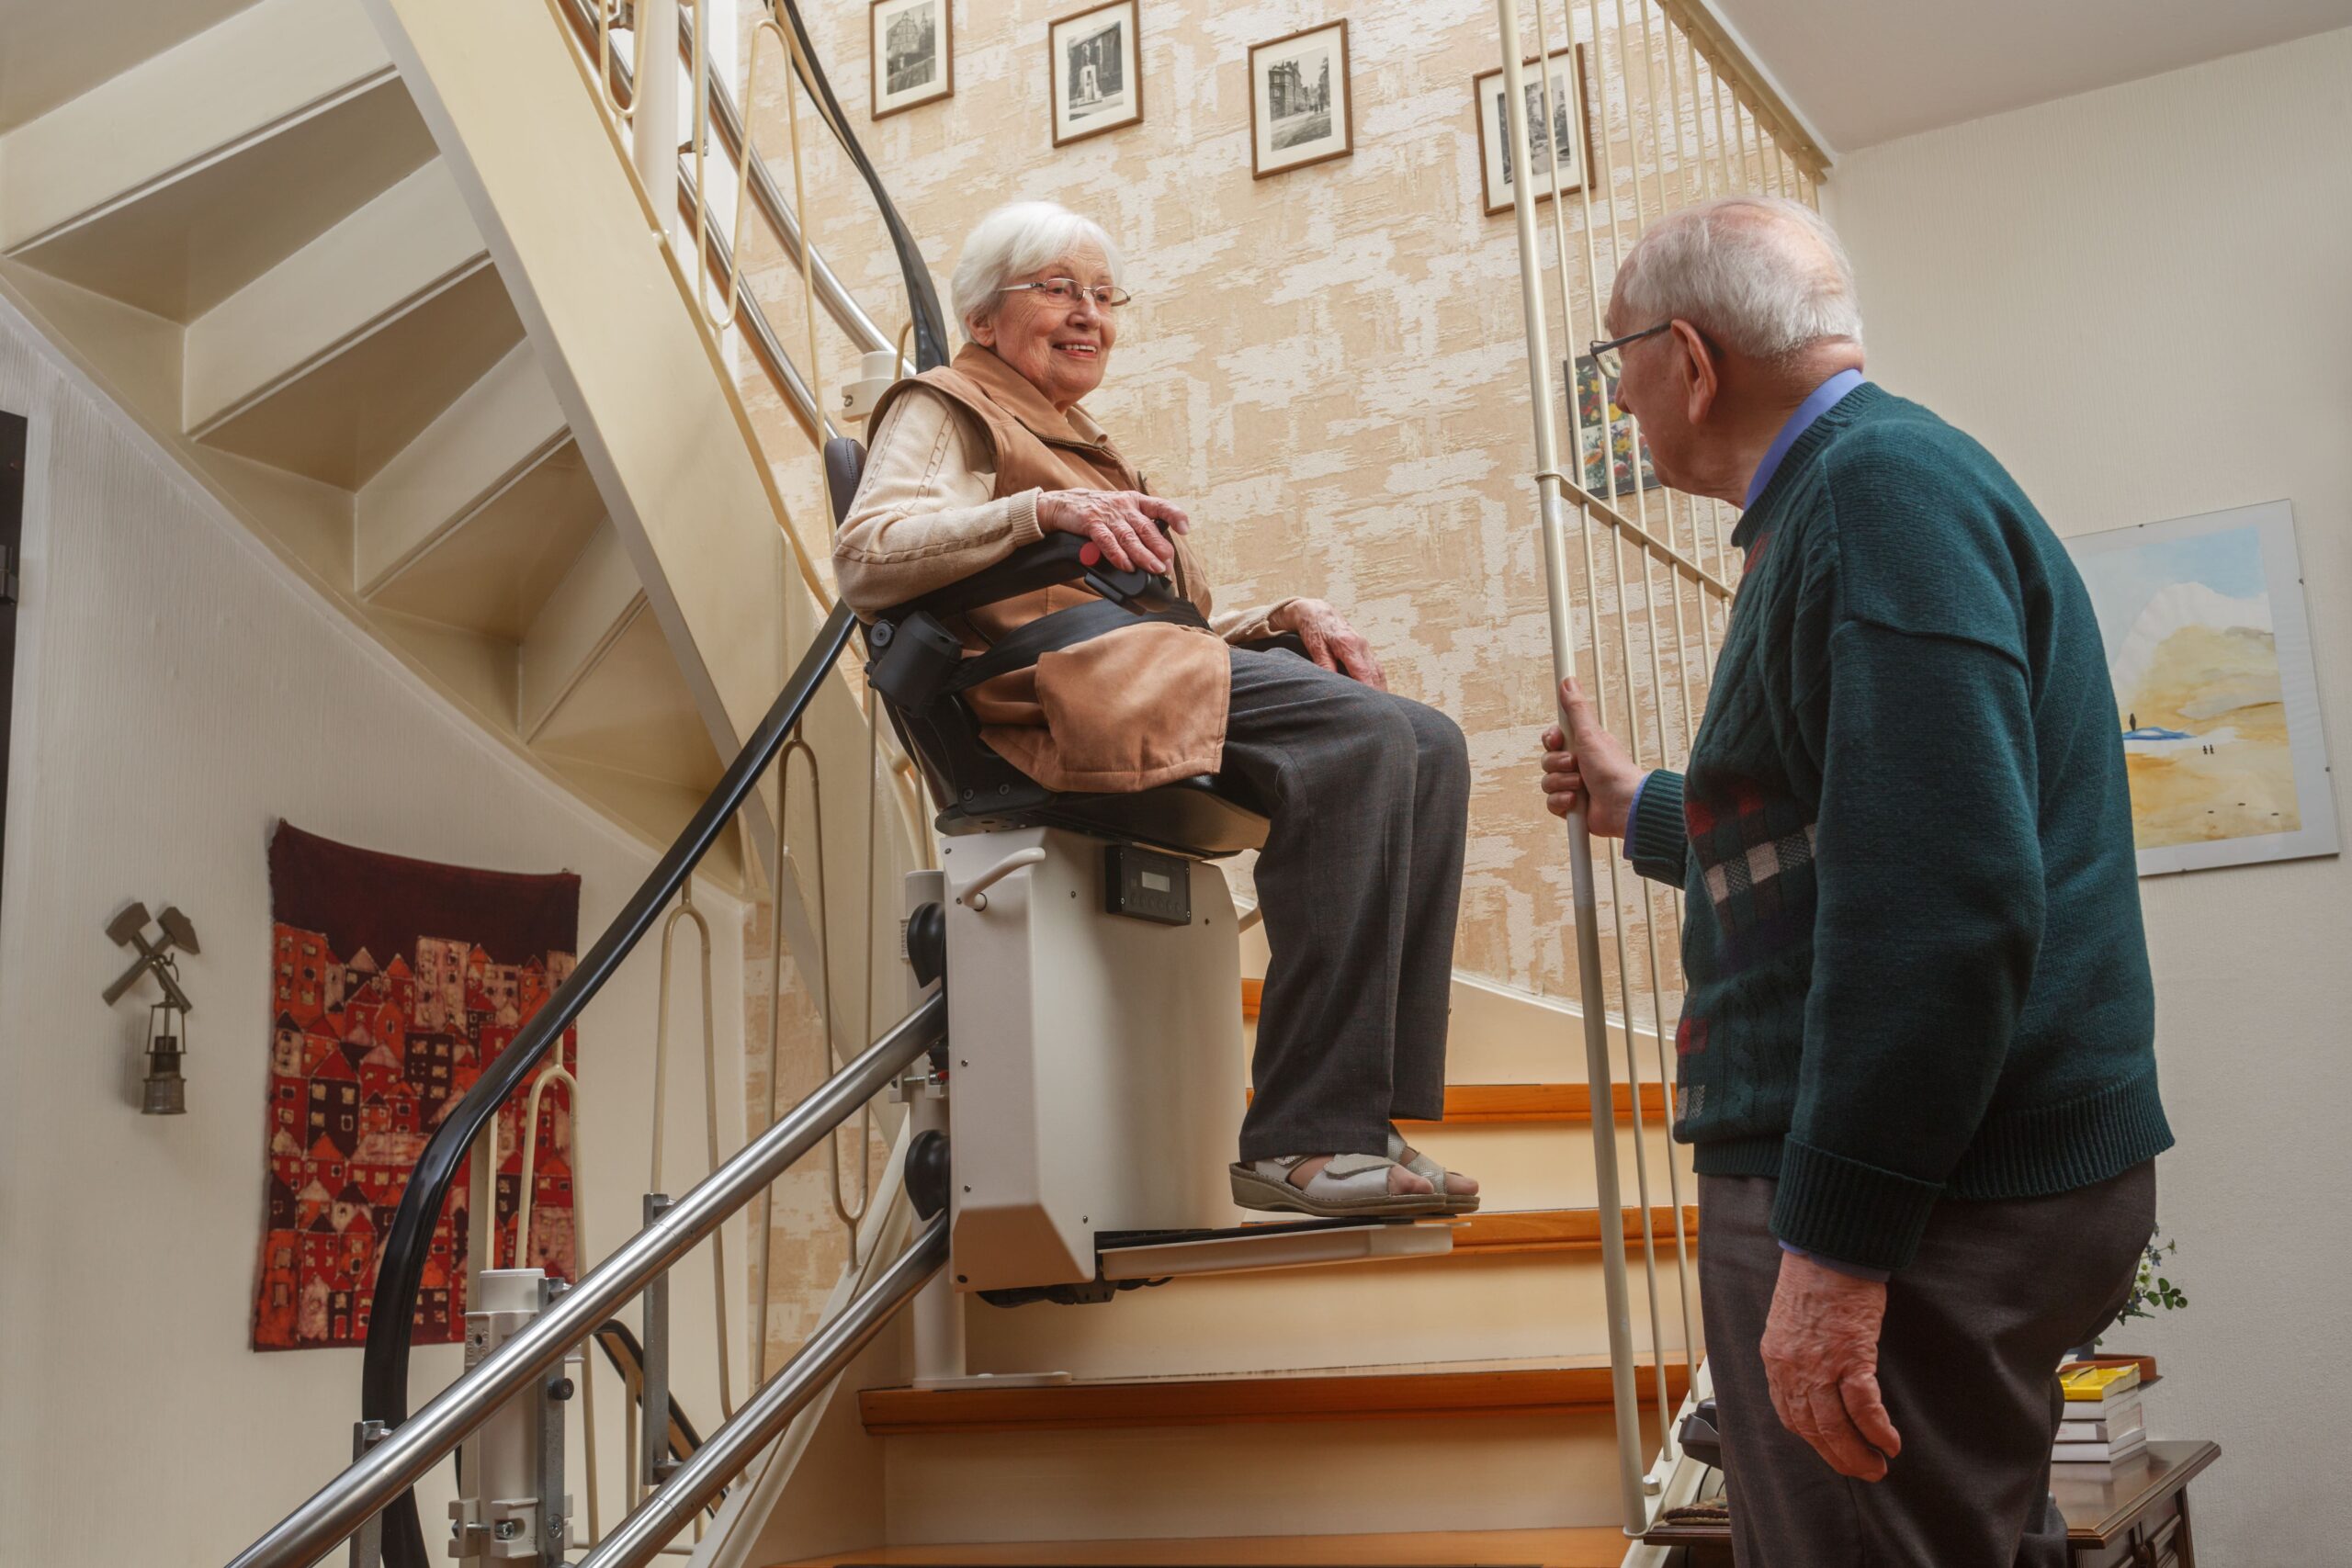 older woman sitting in a Stair Lift while talking to an older man who is standing at the bottom of the stairs